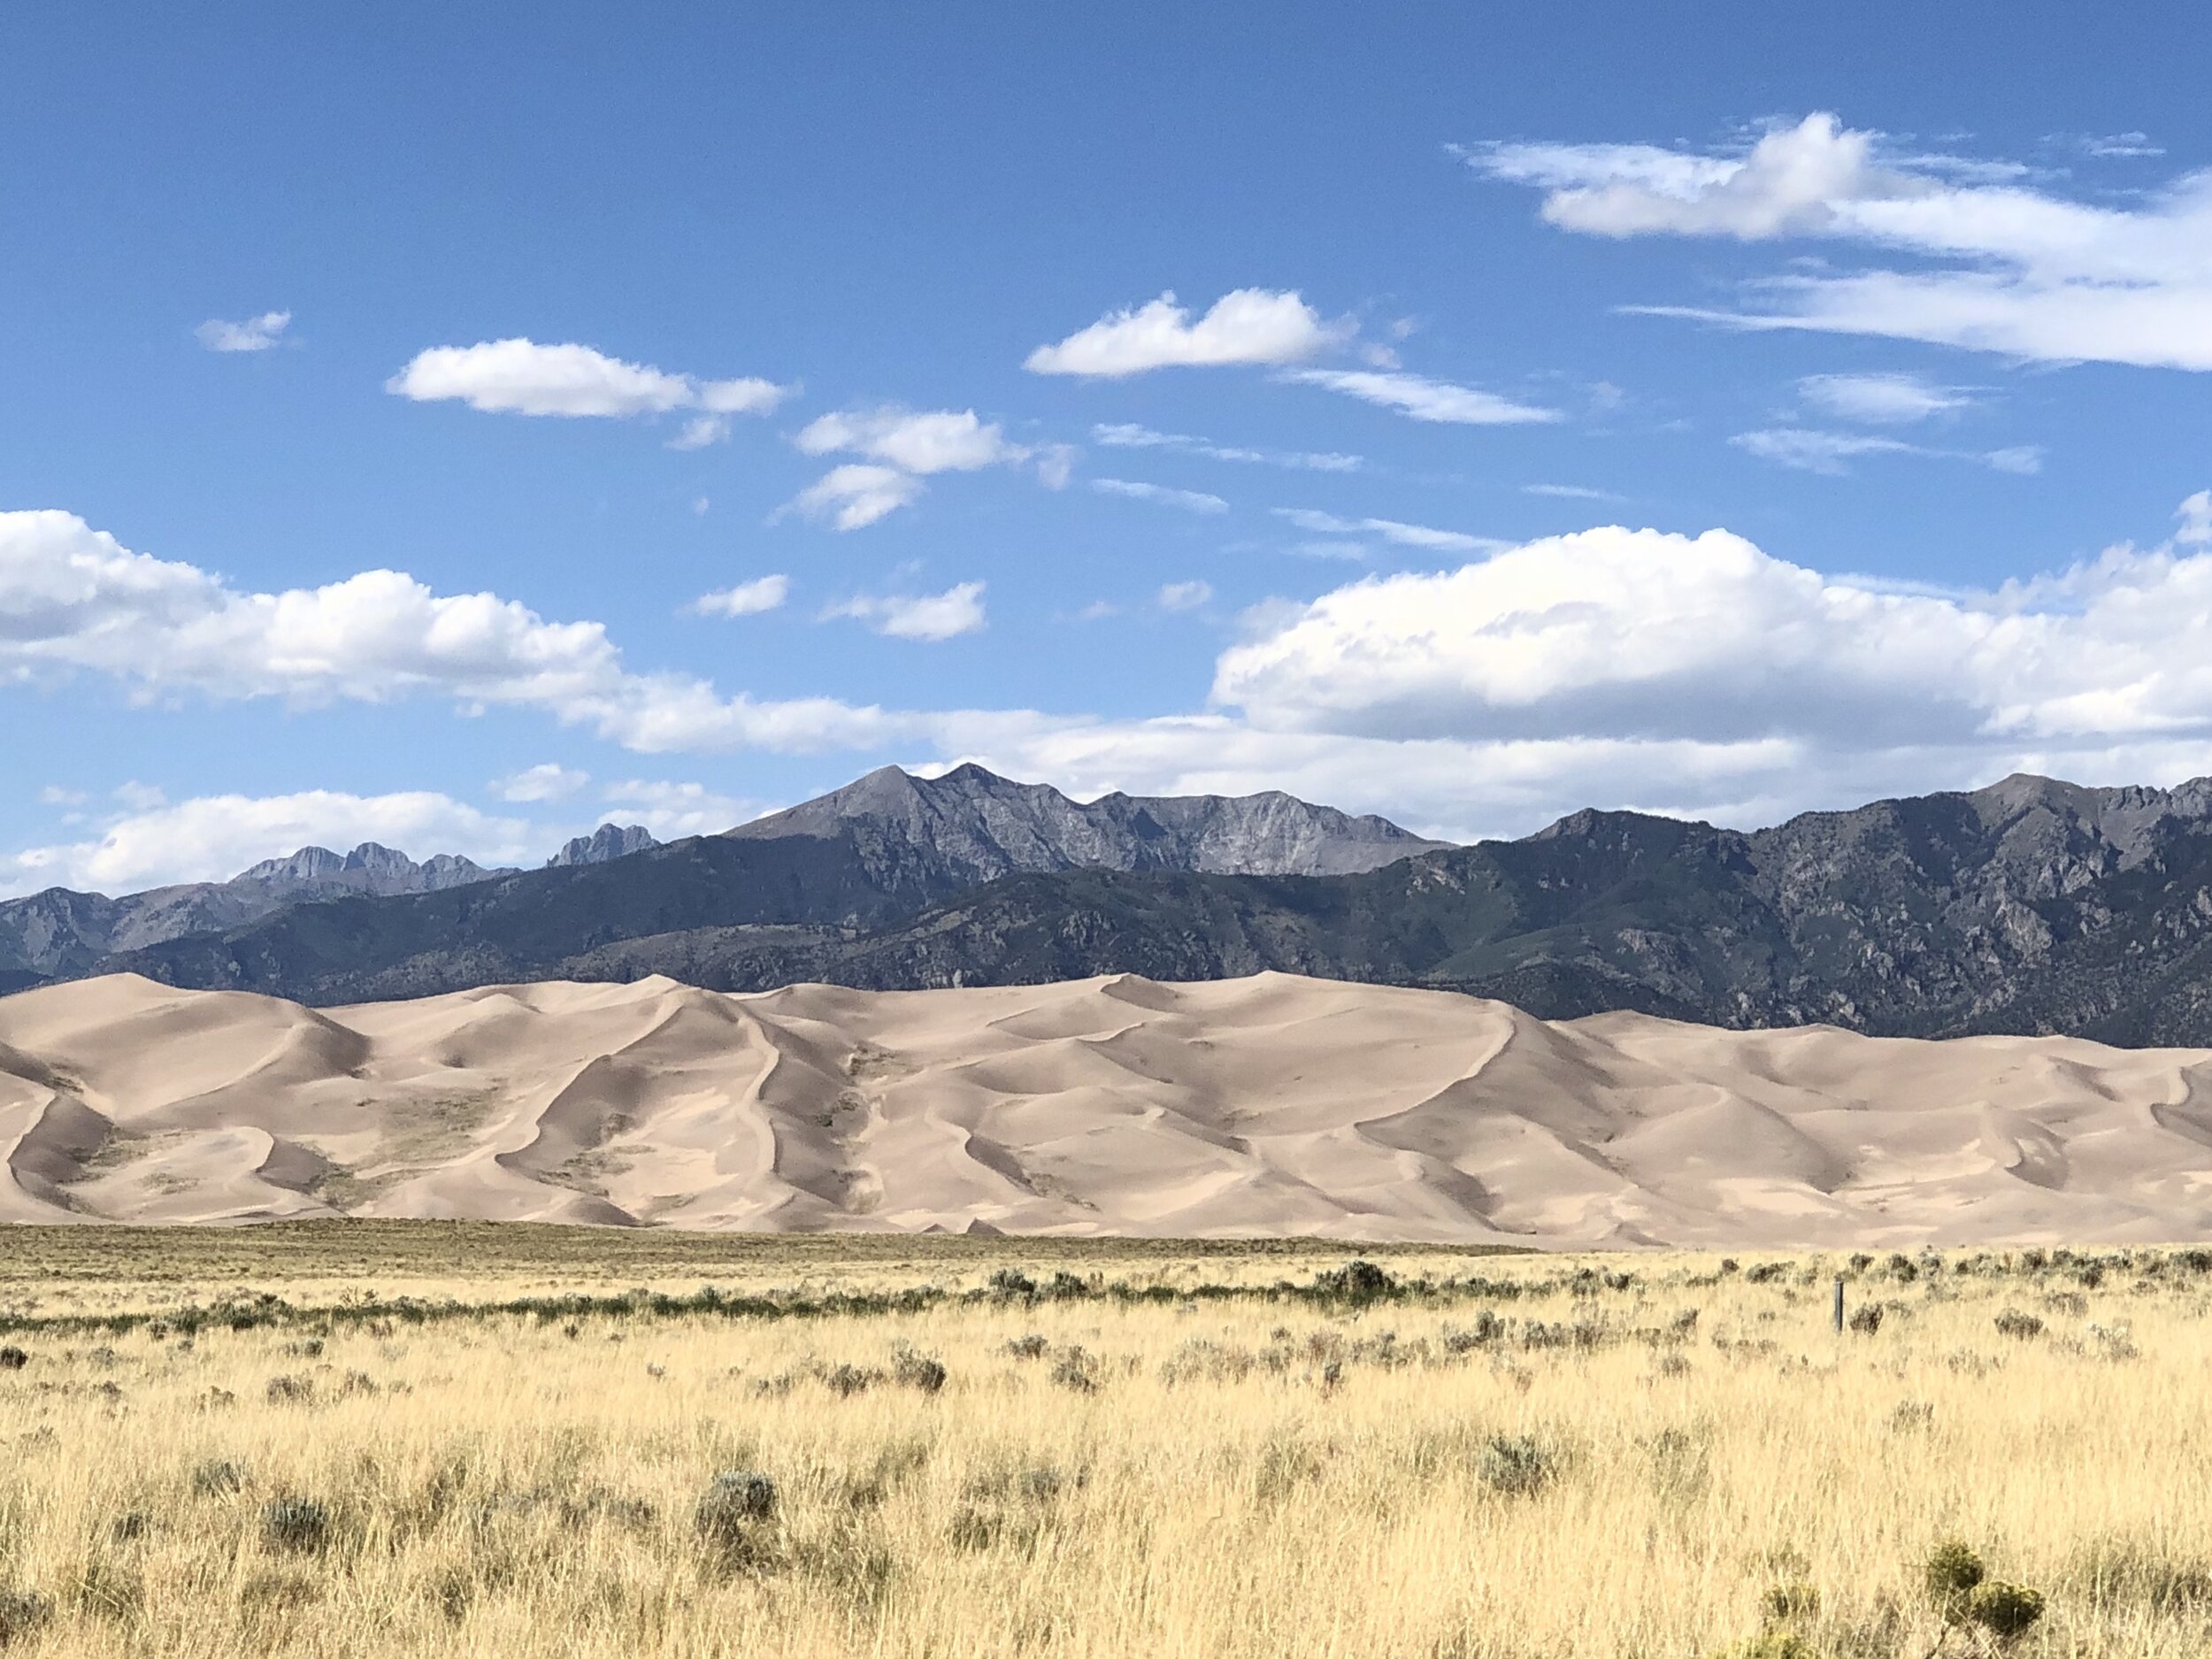 The park includes 30 square miles of sand dunes in Colorado’s broad San Luis Valley.